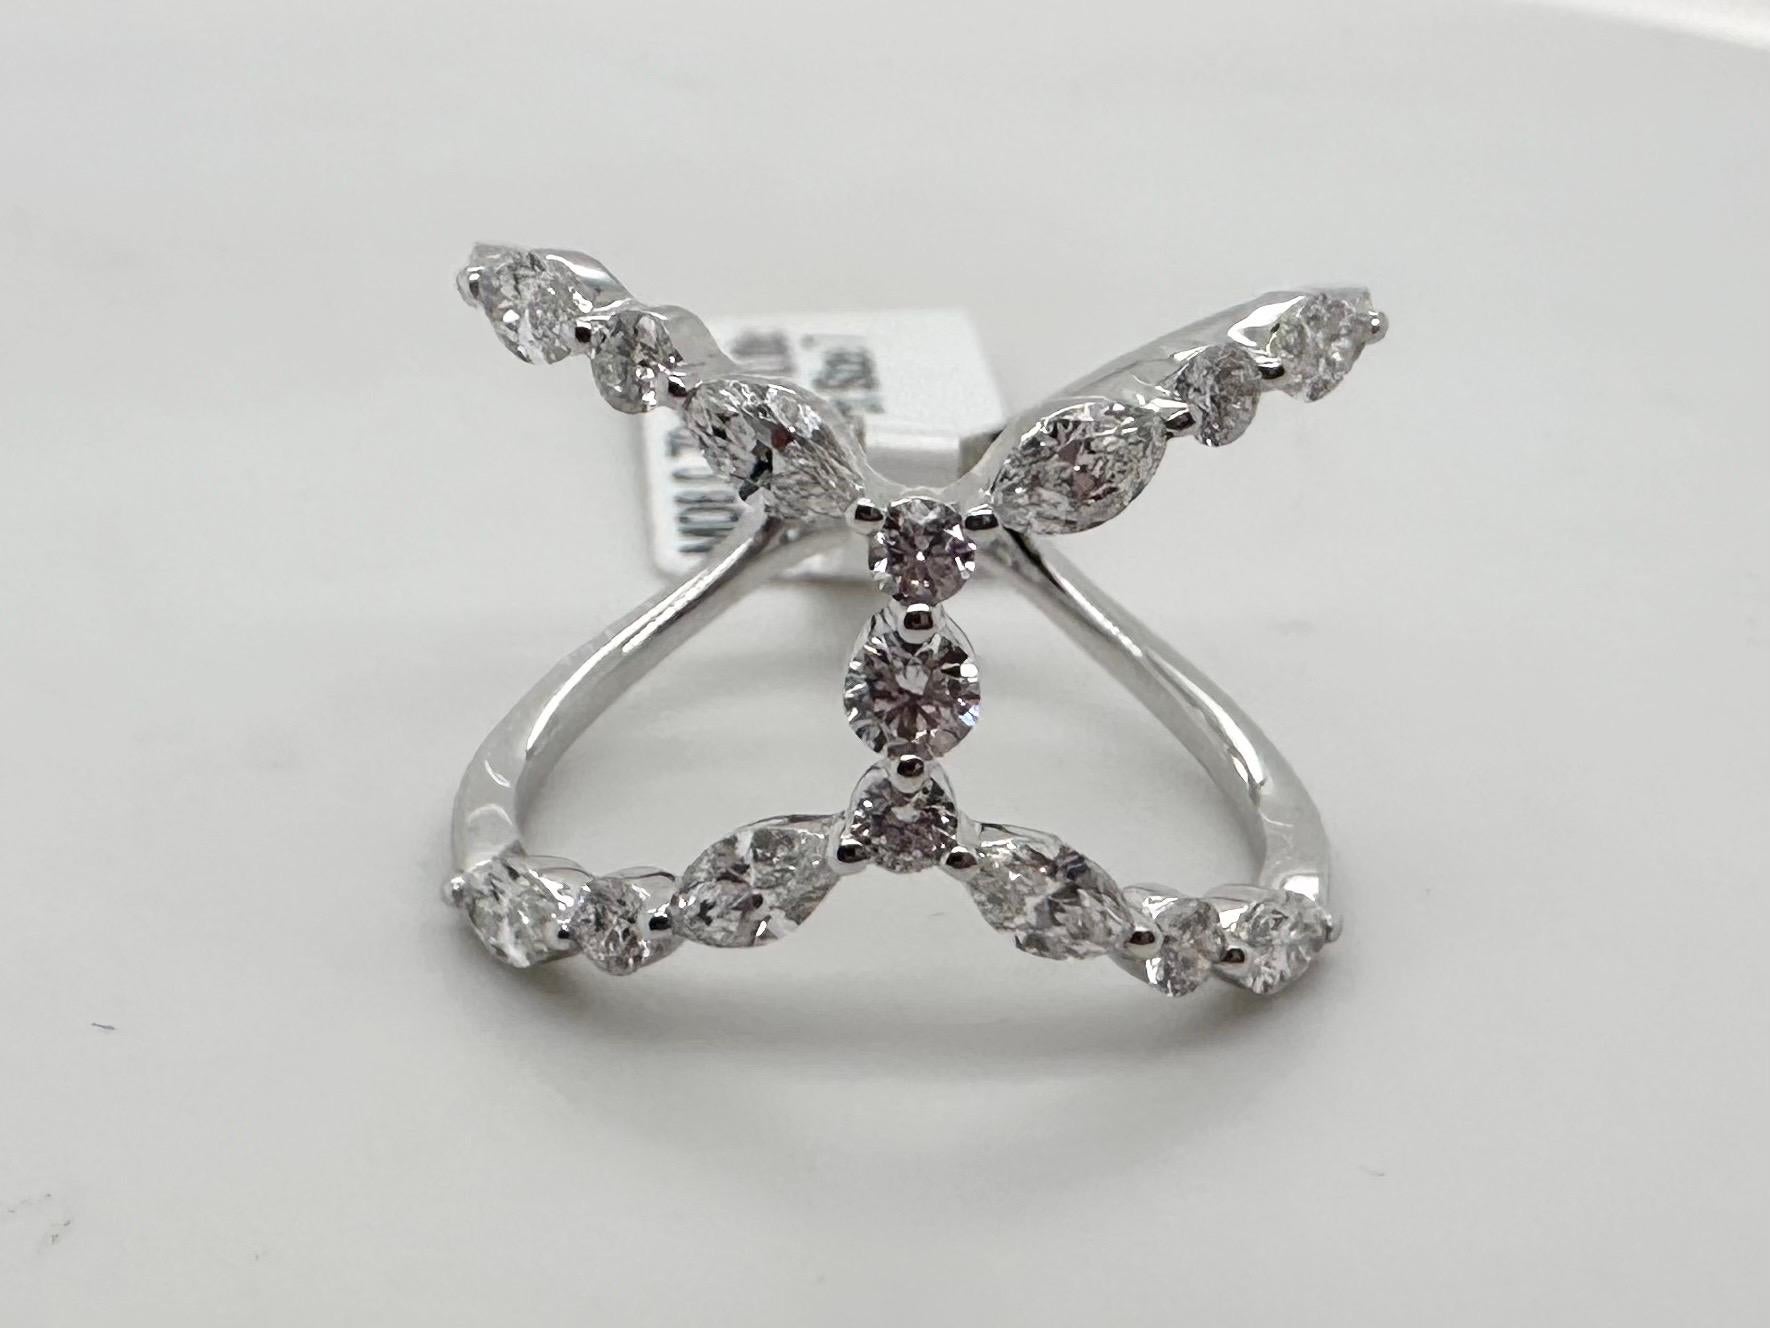 Stunning marquise diamond ring in 18KT white gold made with 1.01 cararts of diamonds VS clarity D/E/F colors (fine quality) will come with certificate of authenticity in your name. Ring is size 7 and can be adjusted.


ABOUT US
We are a family-owned